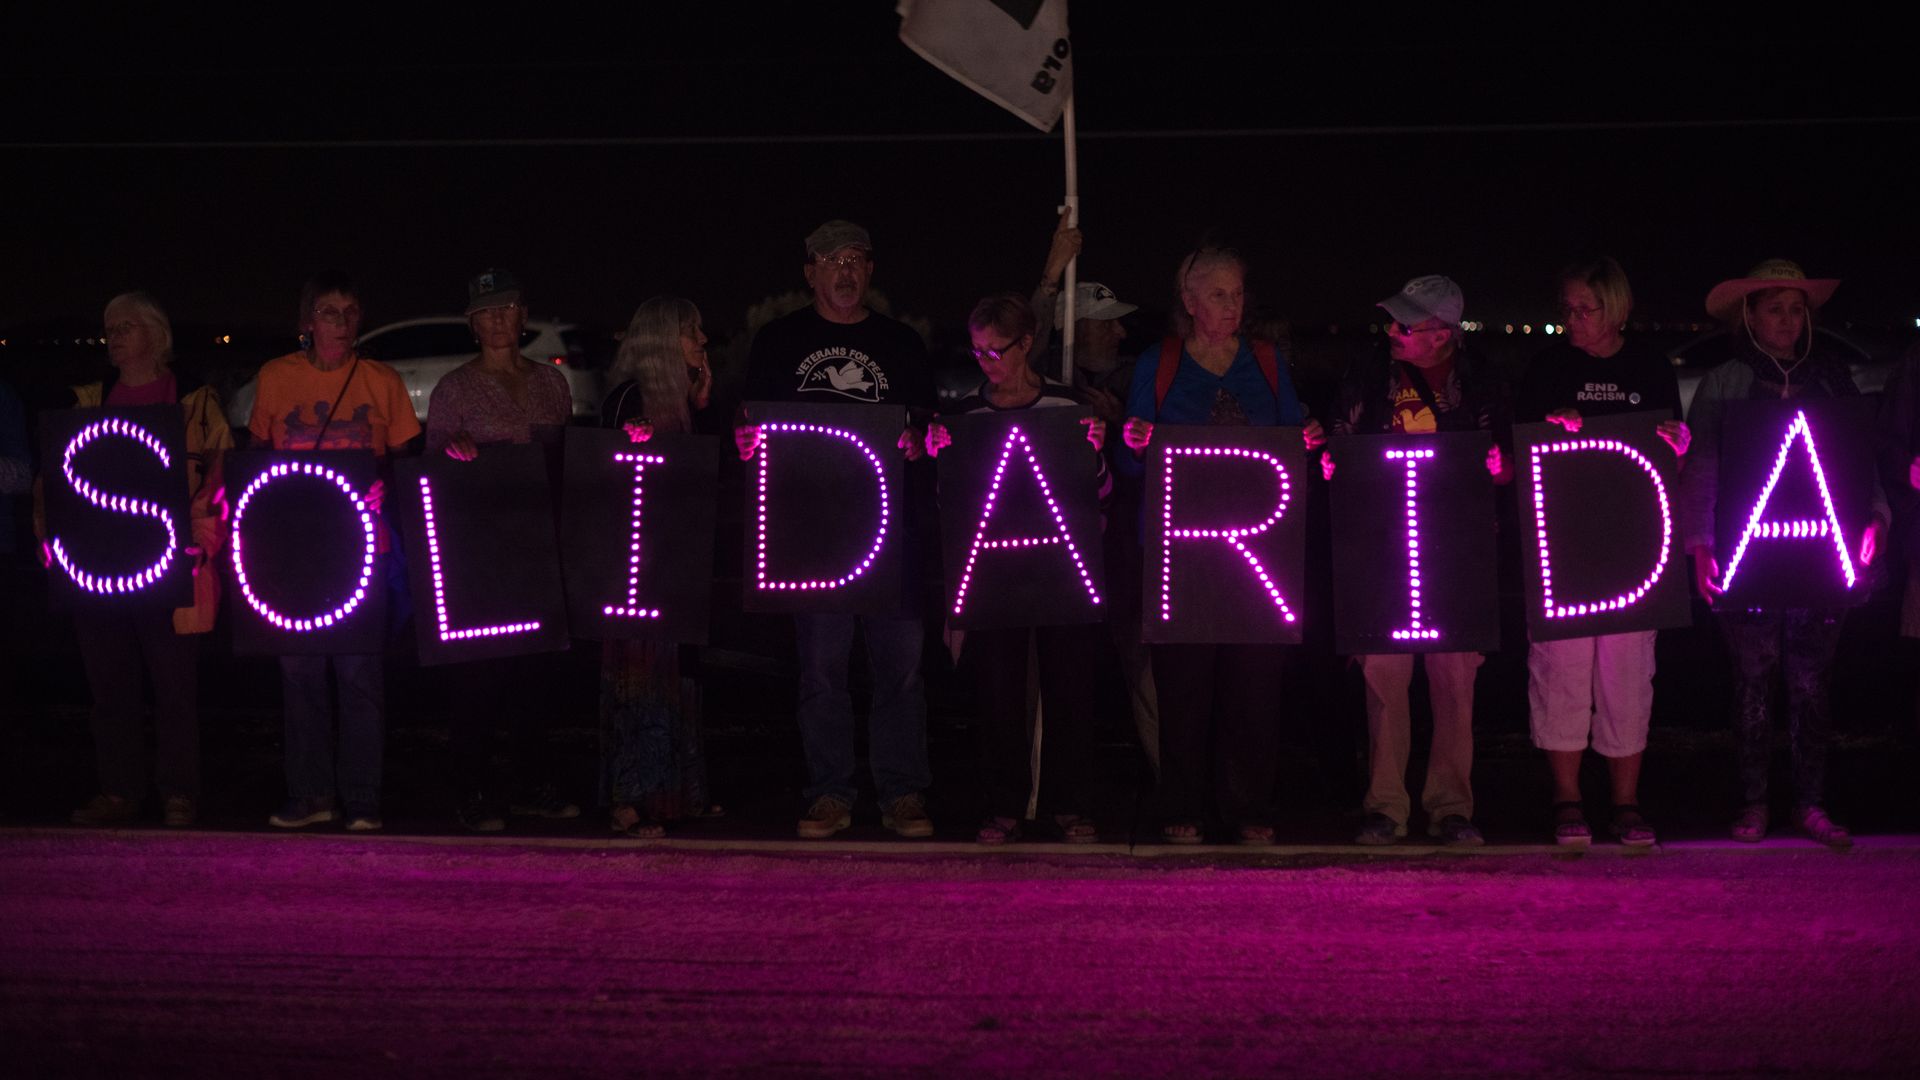 Group of protestors in the dark hold a lowing sign that says "solidarida" 